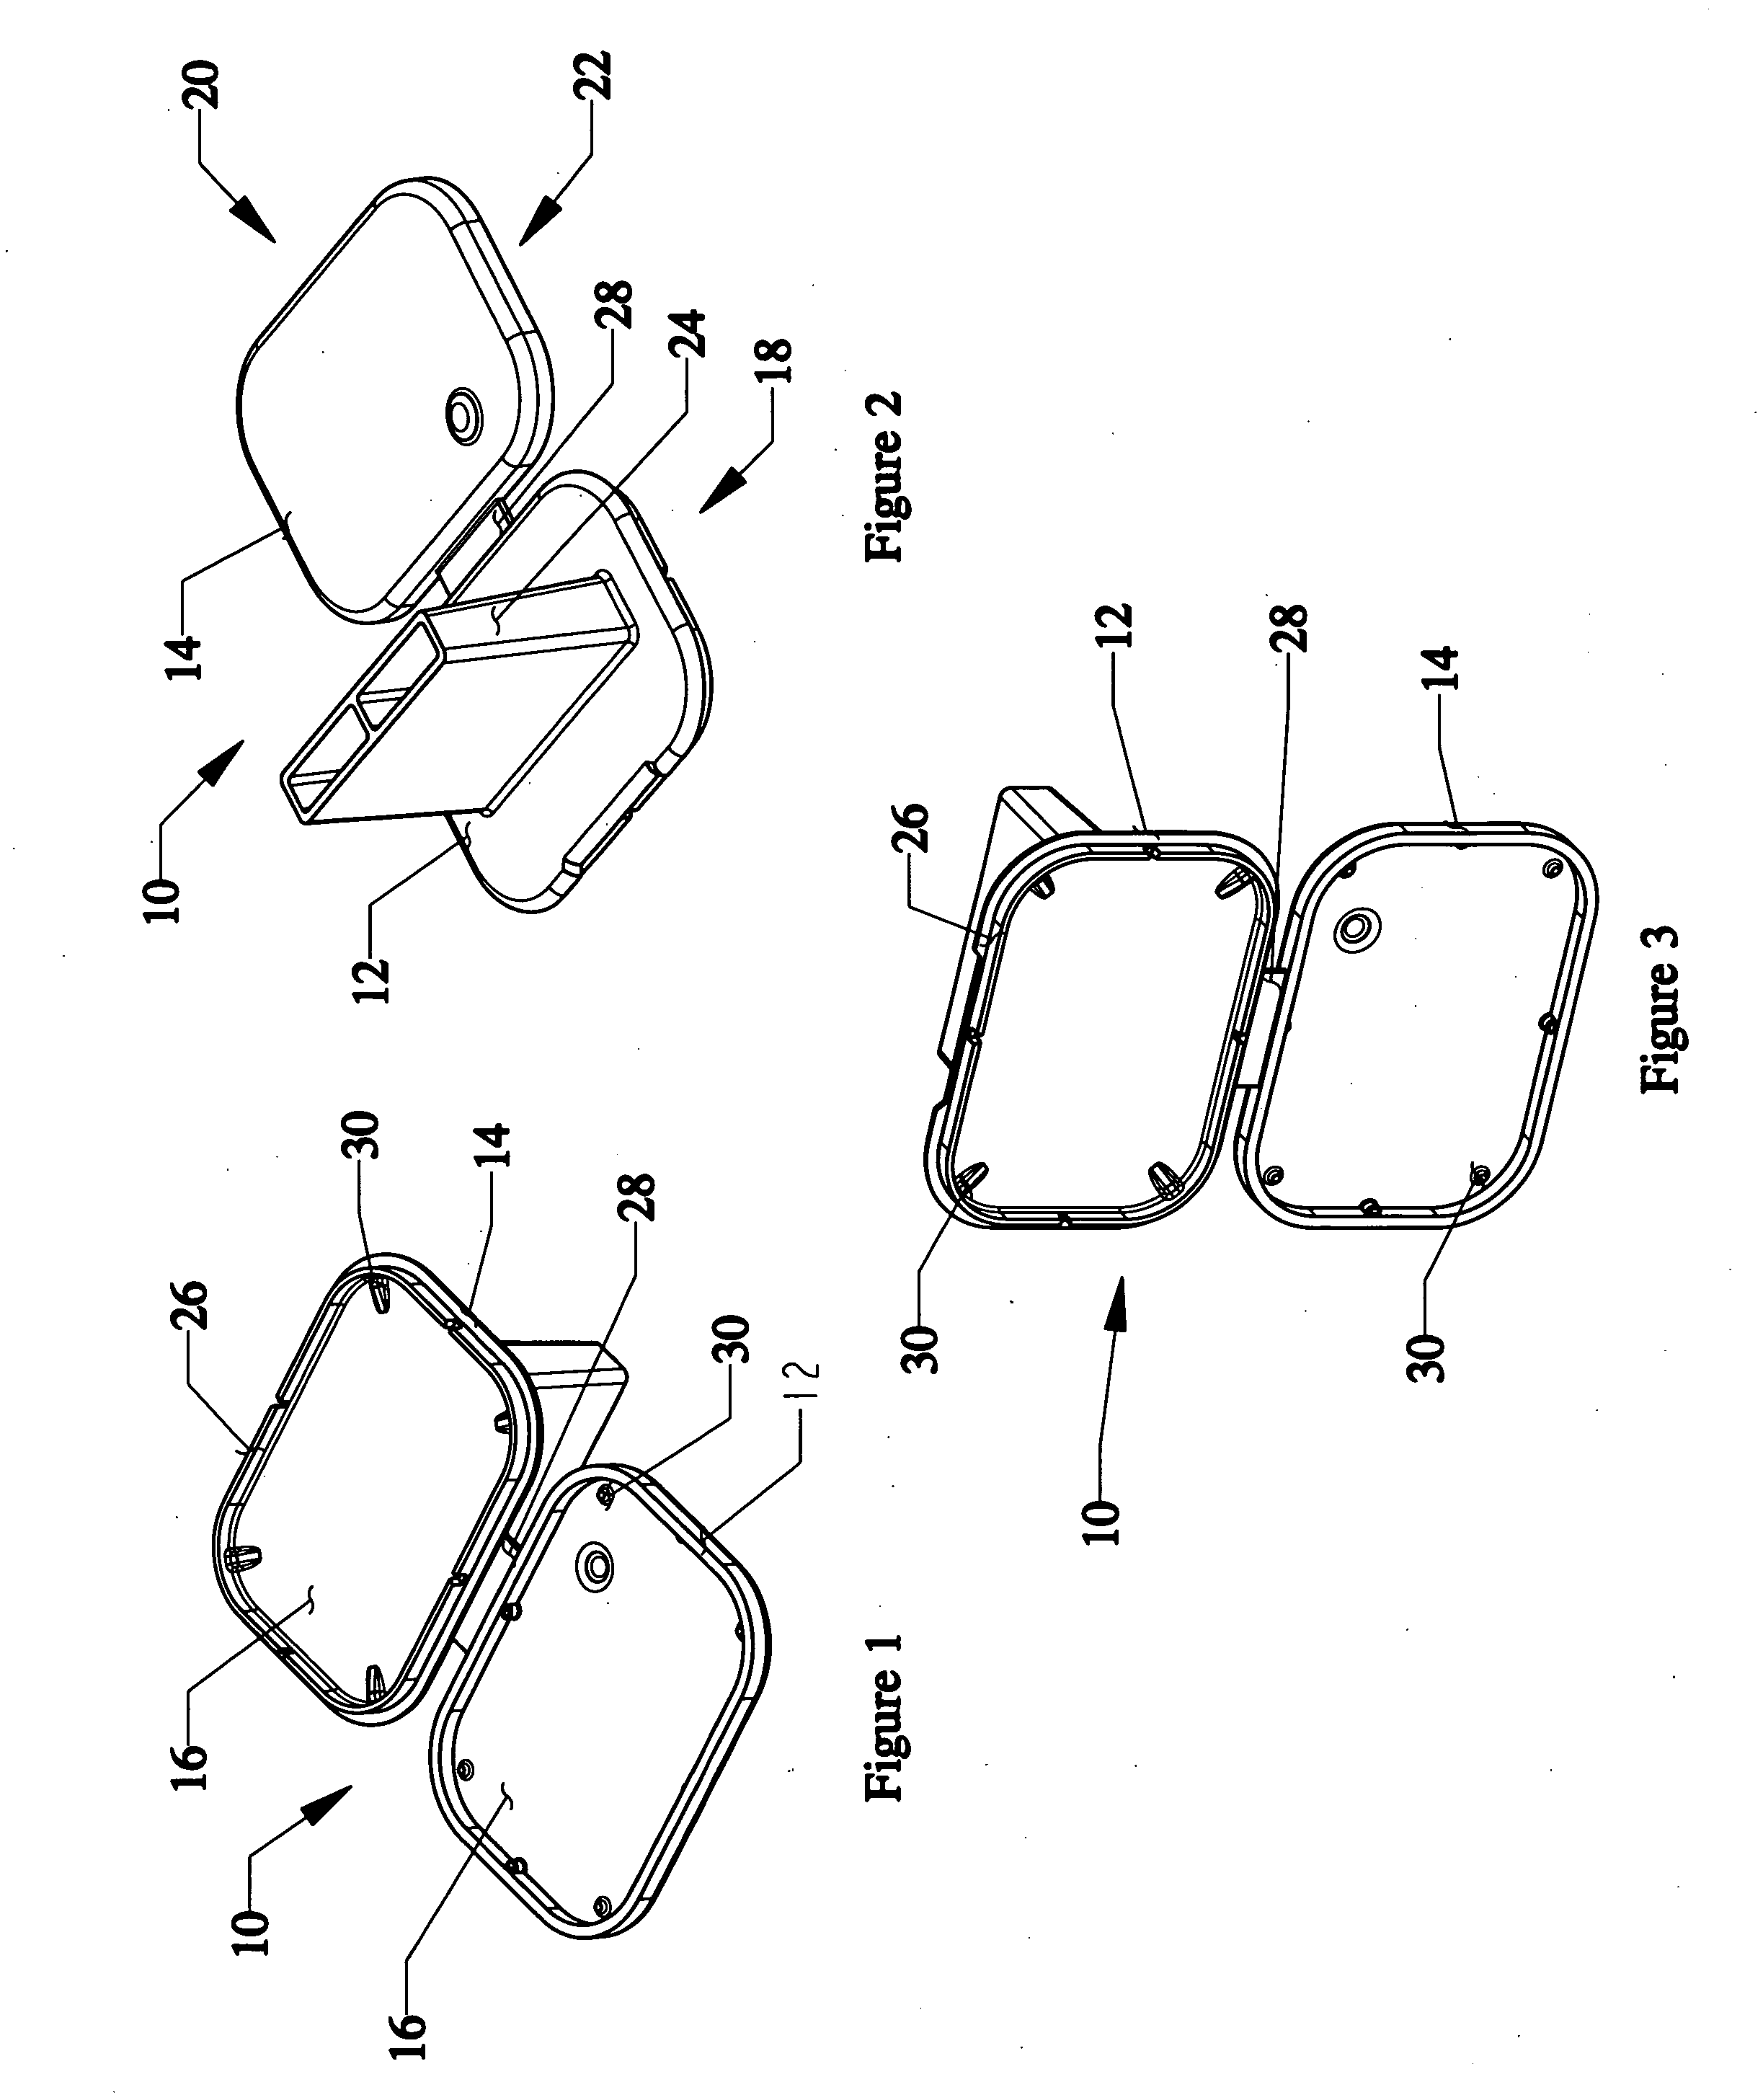 Film and storage plate protection systems and methods